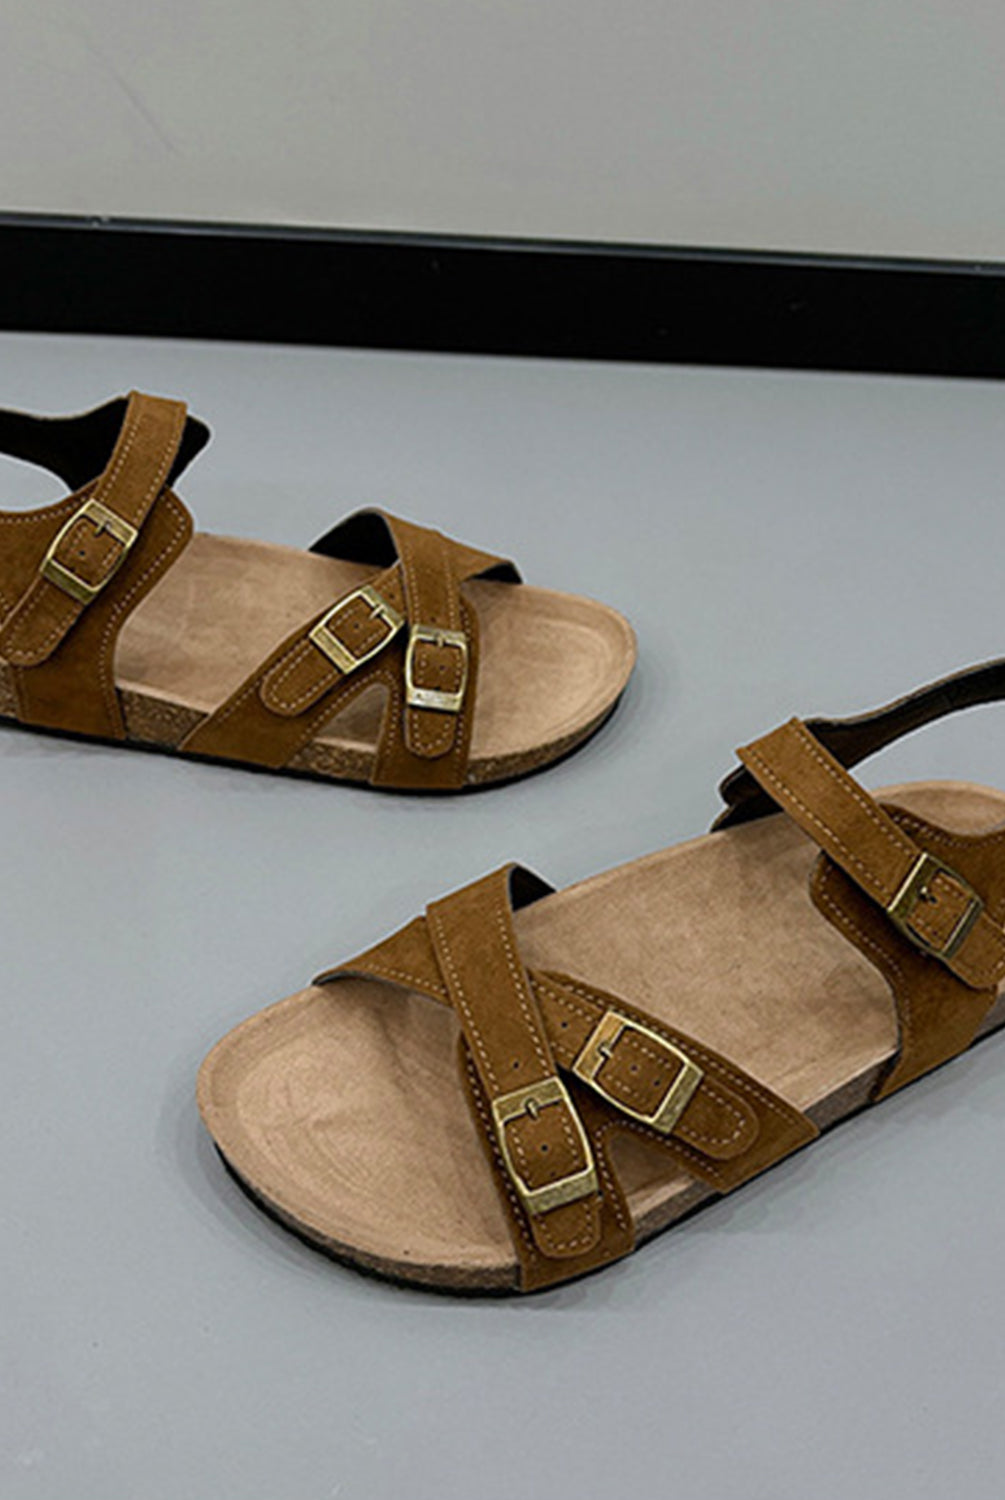 Stylish buckle sandals in a versatile hue, available at GemThreads Boutique.